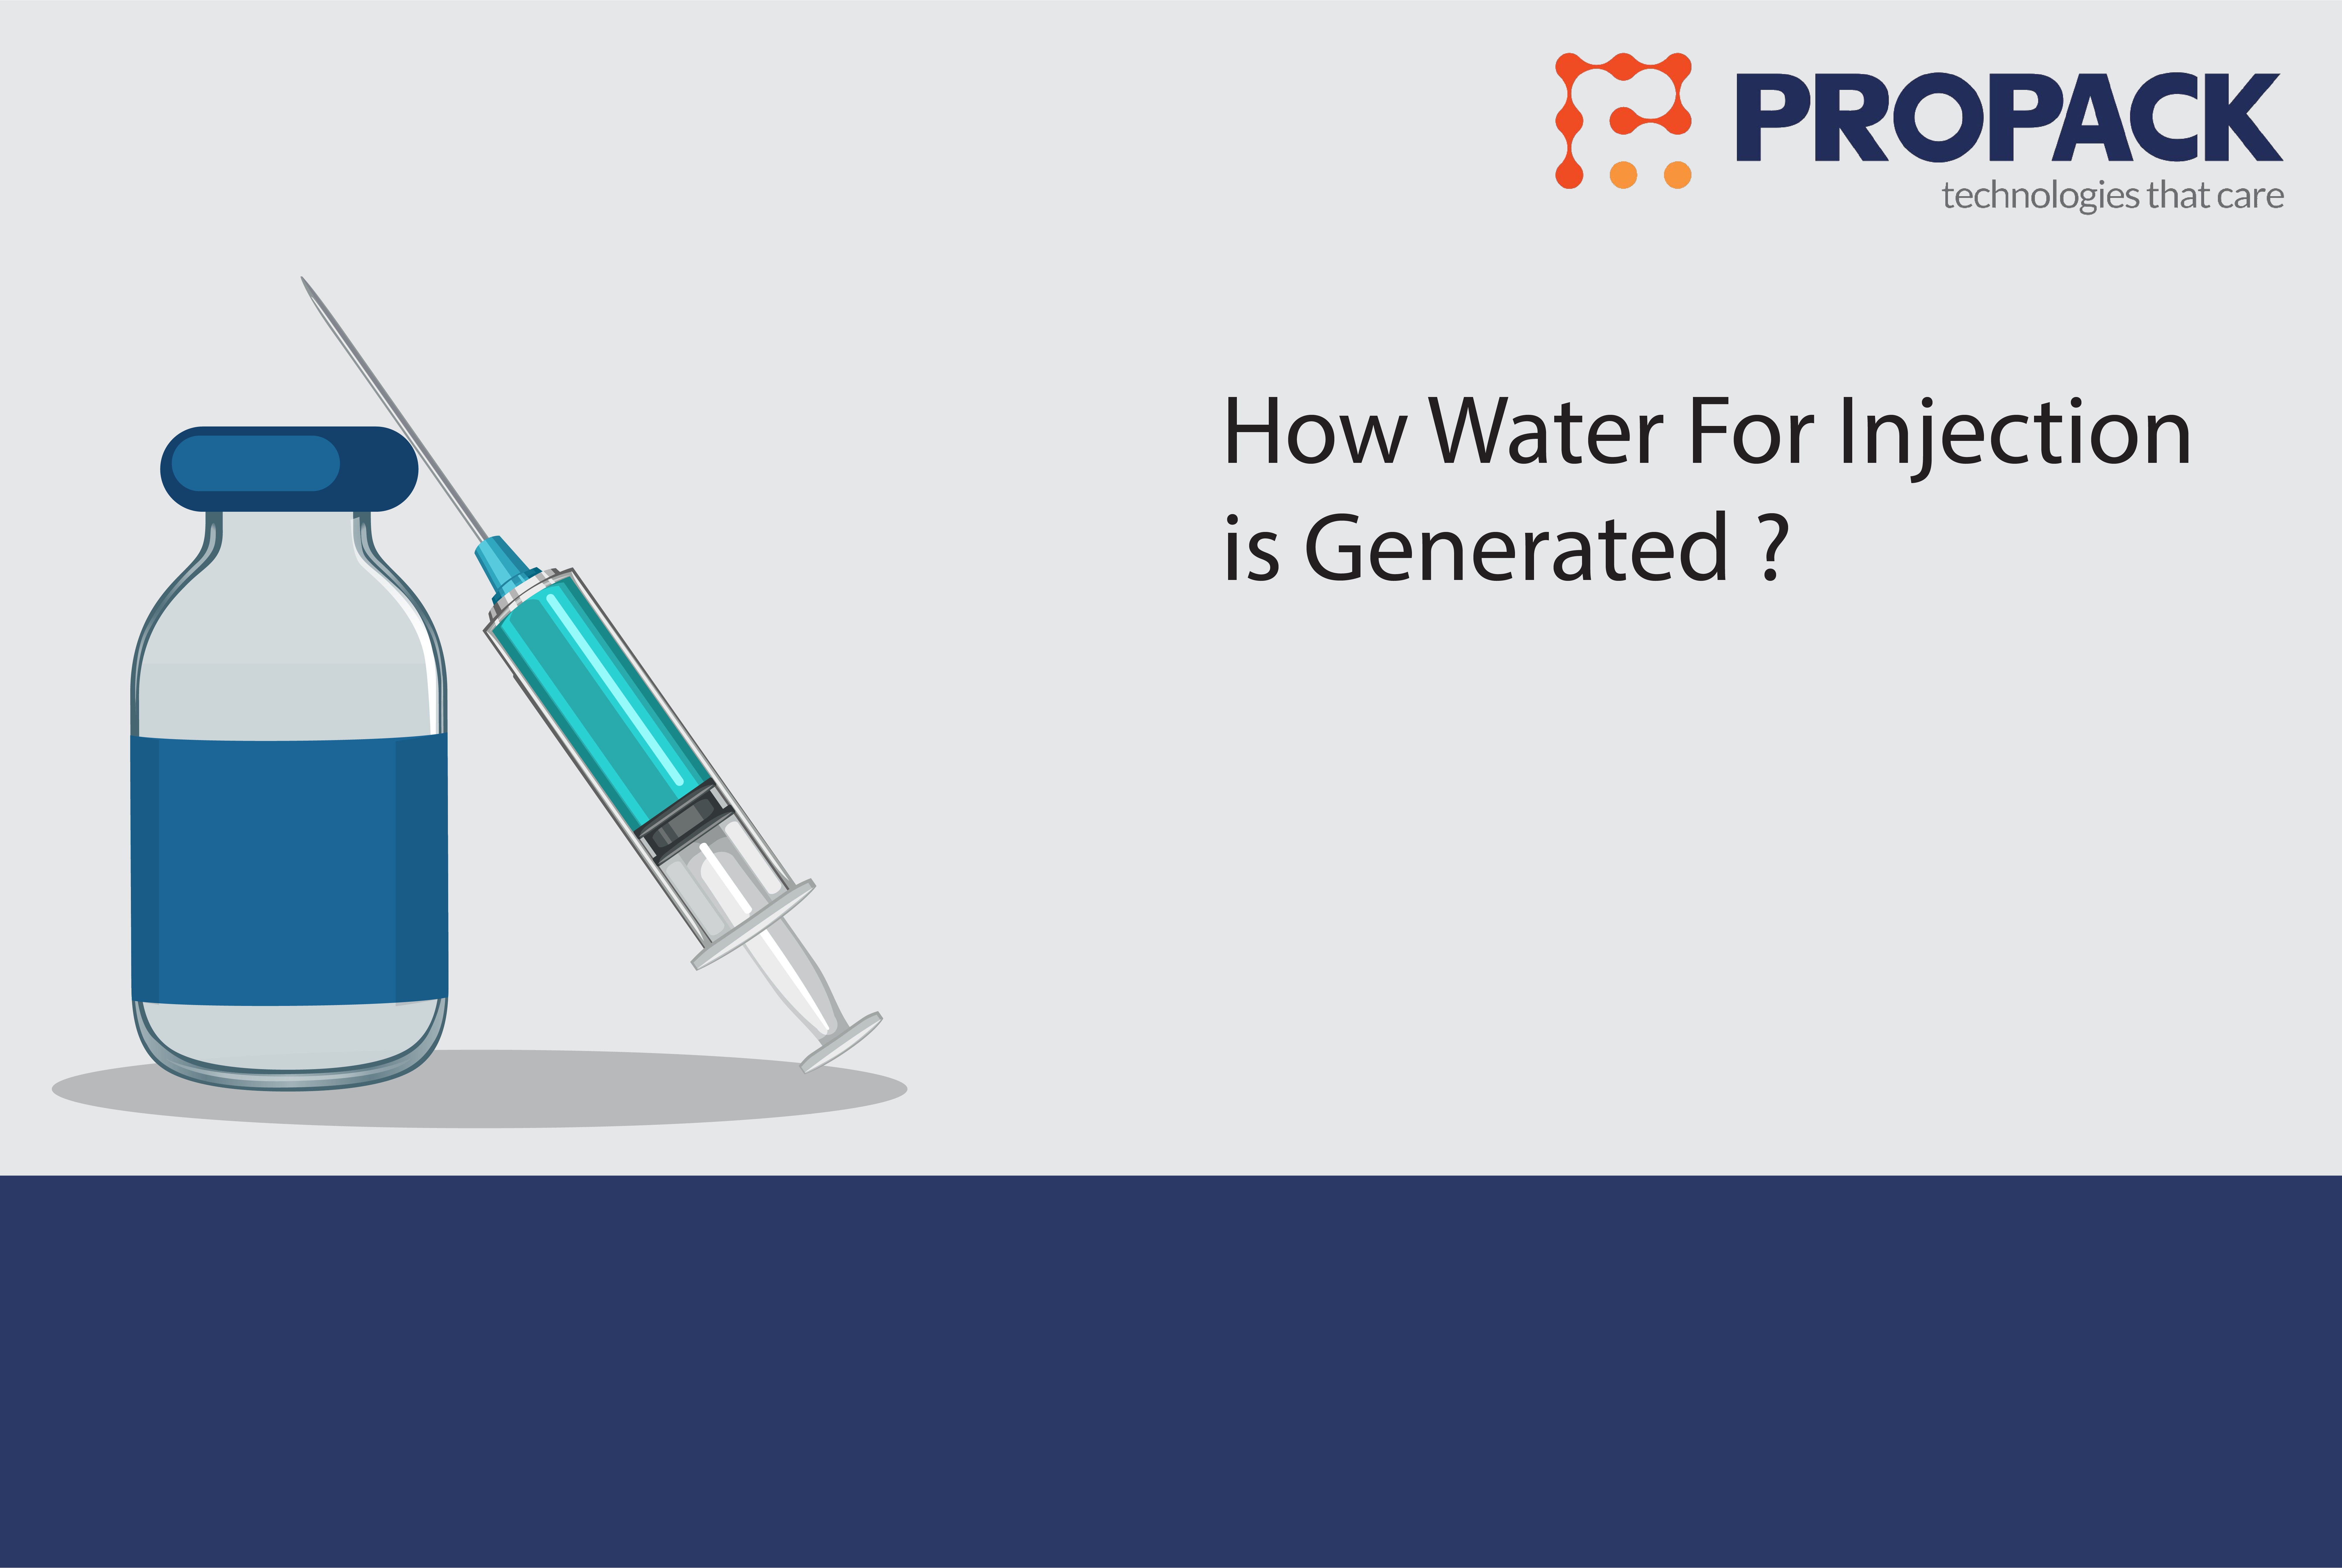 How Water For Injection is generated